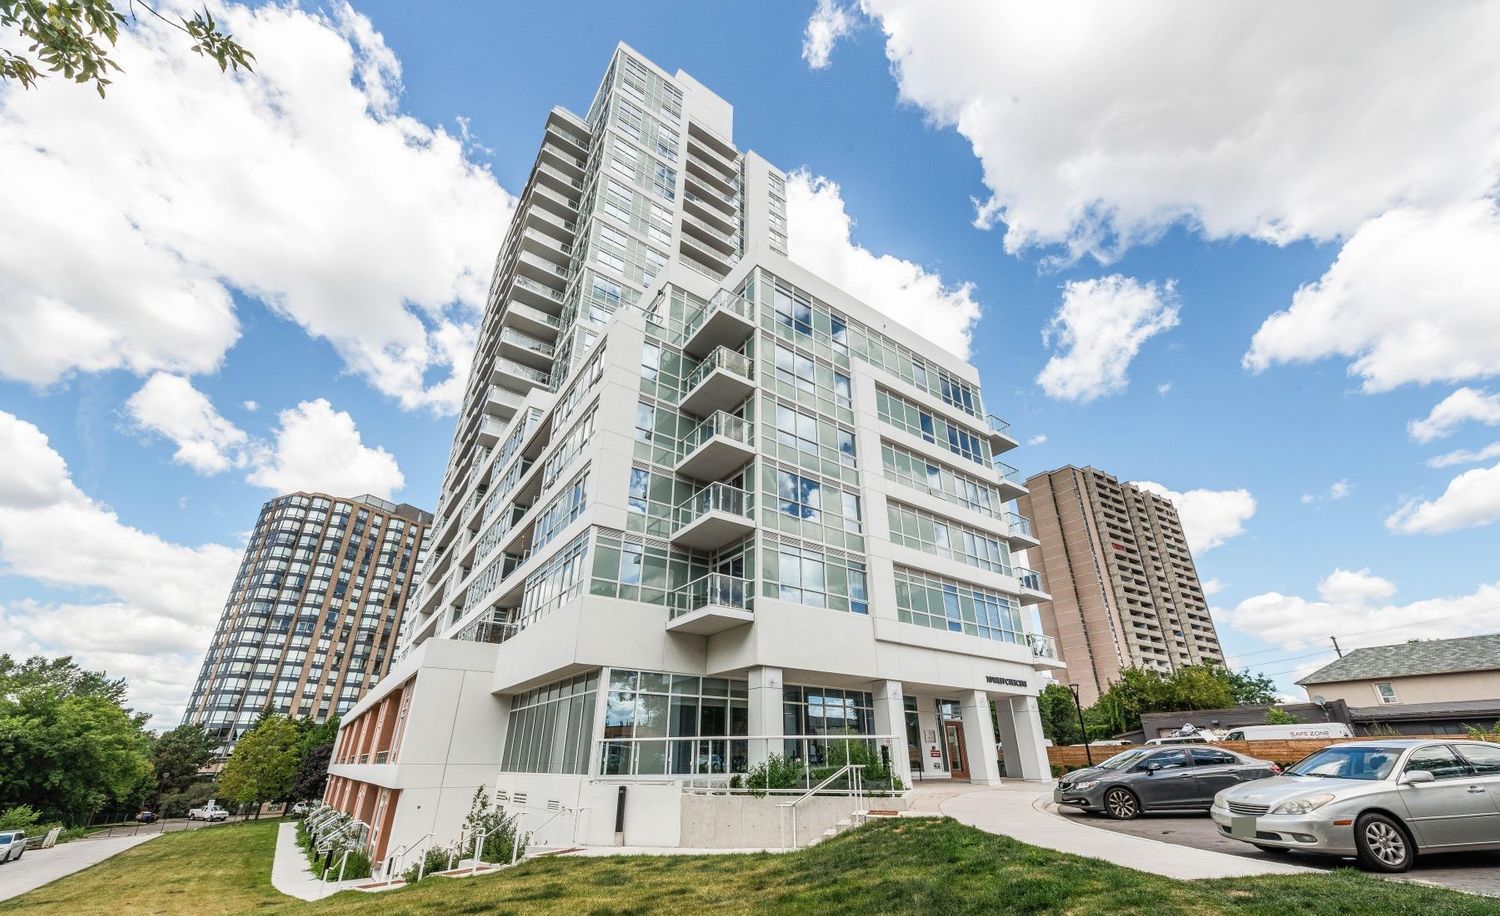 10 Wilby Crescent. The Humber is located in  York Crosstown, Toronto - image #2 of 10